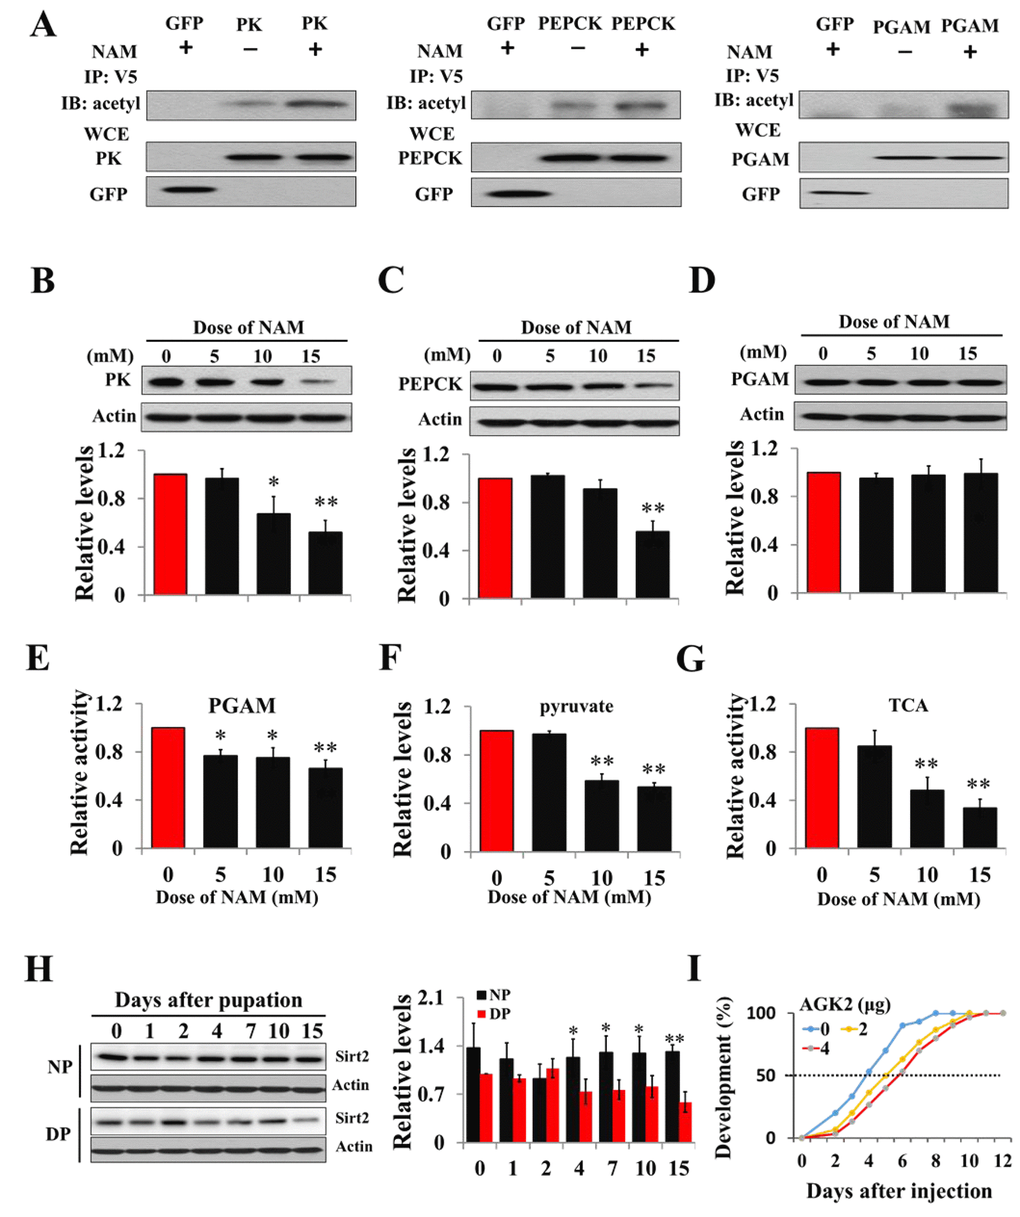 Acetylation negatively regulates PK, PEPCK protein levels and PGAM activity. (A) Acetylation analyses of PK, PGAM and PEPCK. GFP-PK-V5, GFP-PGAM-V5 or GFP-PEPCK-V5 plasmid was transfected into HzAm1 cells, followed by Sirt2 inhibitor NAM treatment. Protein acetylation was analyzed by immunoprecipitation (IP) and western blotting with anti-acetyl-lysine antibody. WCE: whole cell extracts. Changes in PK (B), PEPCK (C), and PGAM (D) protein levels in response to NAM treatment. (E) Changes in PGAM activity with NAM treatment. (F) Changes in pyruvate levels with NAM treatment. (G) Changes in TCA cycle activity with NAM treatment. HzAm1 cells were cultured in 0, 5, 10, and 15 mM NAM for 48 h. (H) Expression pattern of Sirt2 during pupal development. Protein extracts from the brains or cells were used for western blotting with the indicated antibodies. Protein bands were quantified using ImageJ software and normalized to the levels of H. armigera actin (5 μg). Pyruvate levels and enzyme activity was measured and normalized against total protein levels. DP, diapause-destined pupae; NP, nondiapause-destined pupae. (I) Developmental delay caused by AGK2 injection. Day-1 nondiapause-destined pupae were injected with 2 μg (n=60) or 4 μg (n=60) AGK2 or DMSO (n=60) as the control. Developmental delay was determined by examining the location of the pupal stemmata. Each point represents the means±S.D. of three independent replicates. *, p